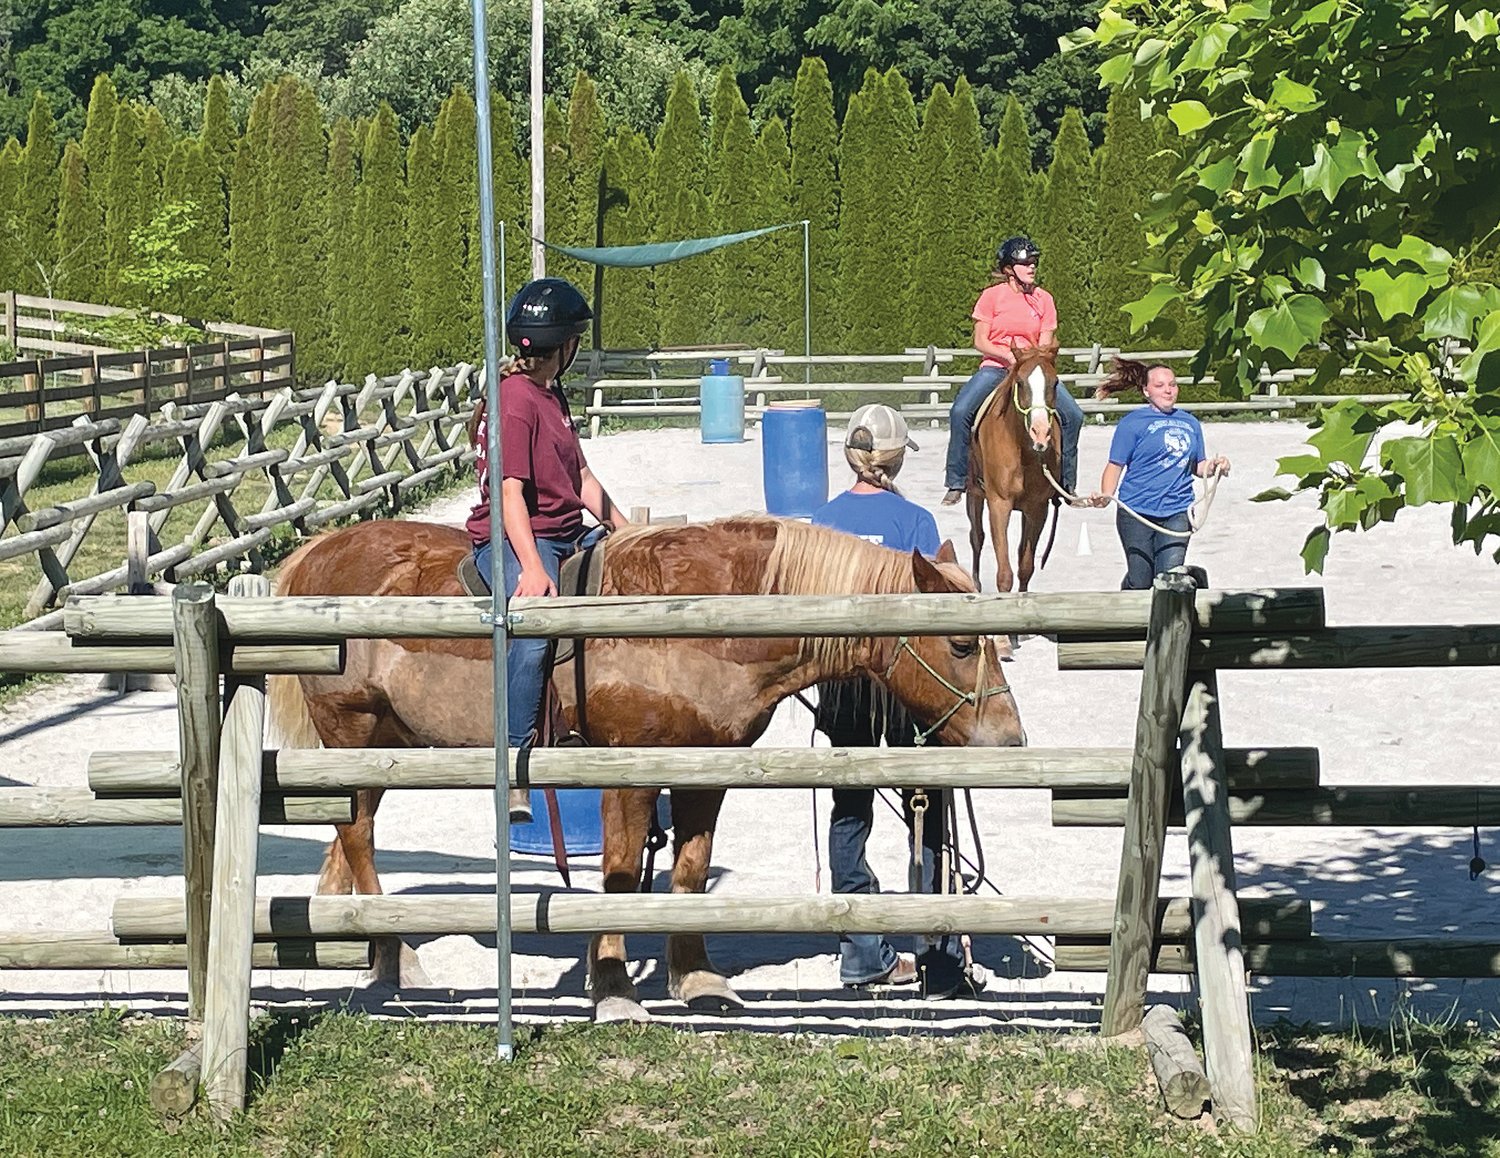 Participants in the Harmony Project ride horses at the Achaius Ranch in Ladoga.